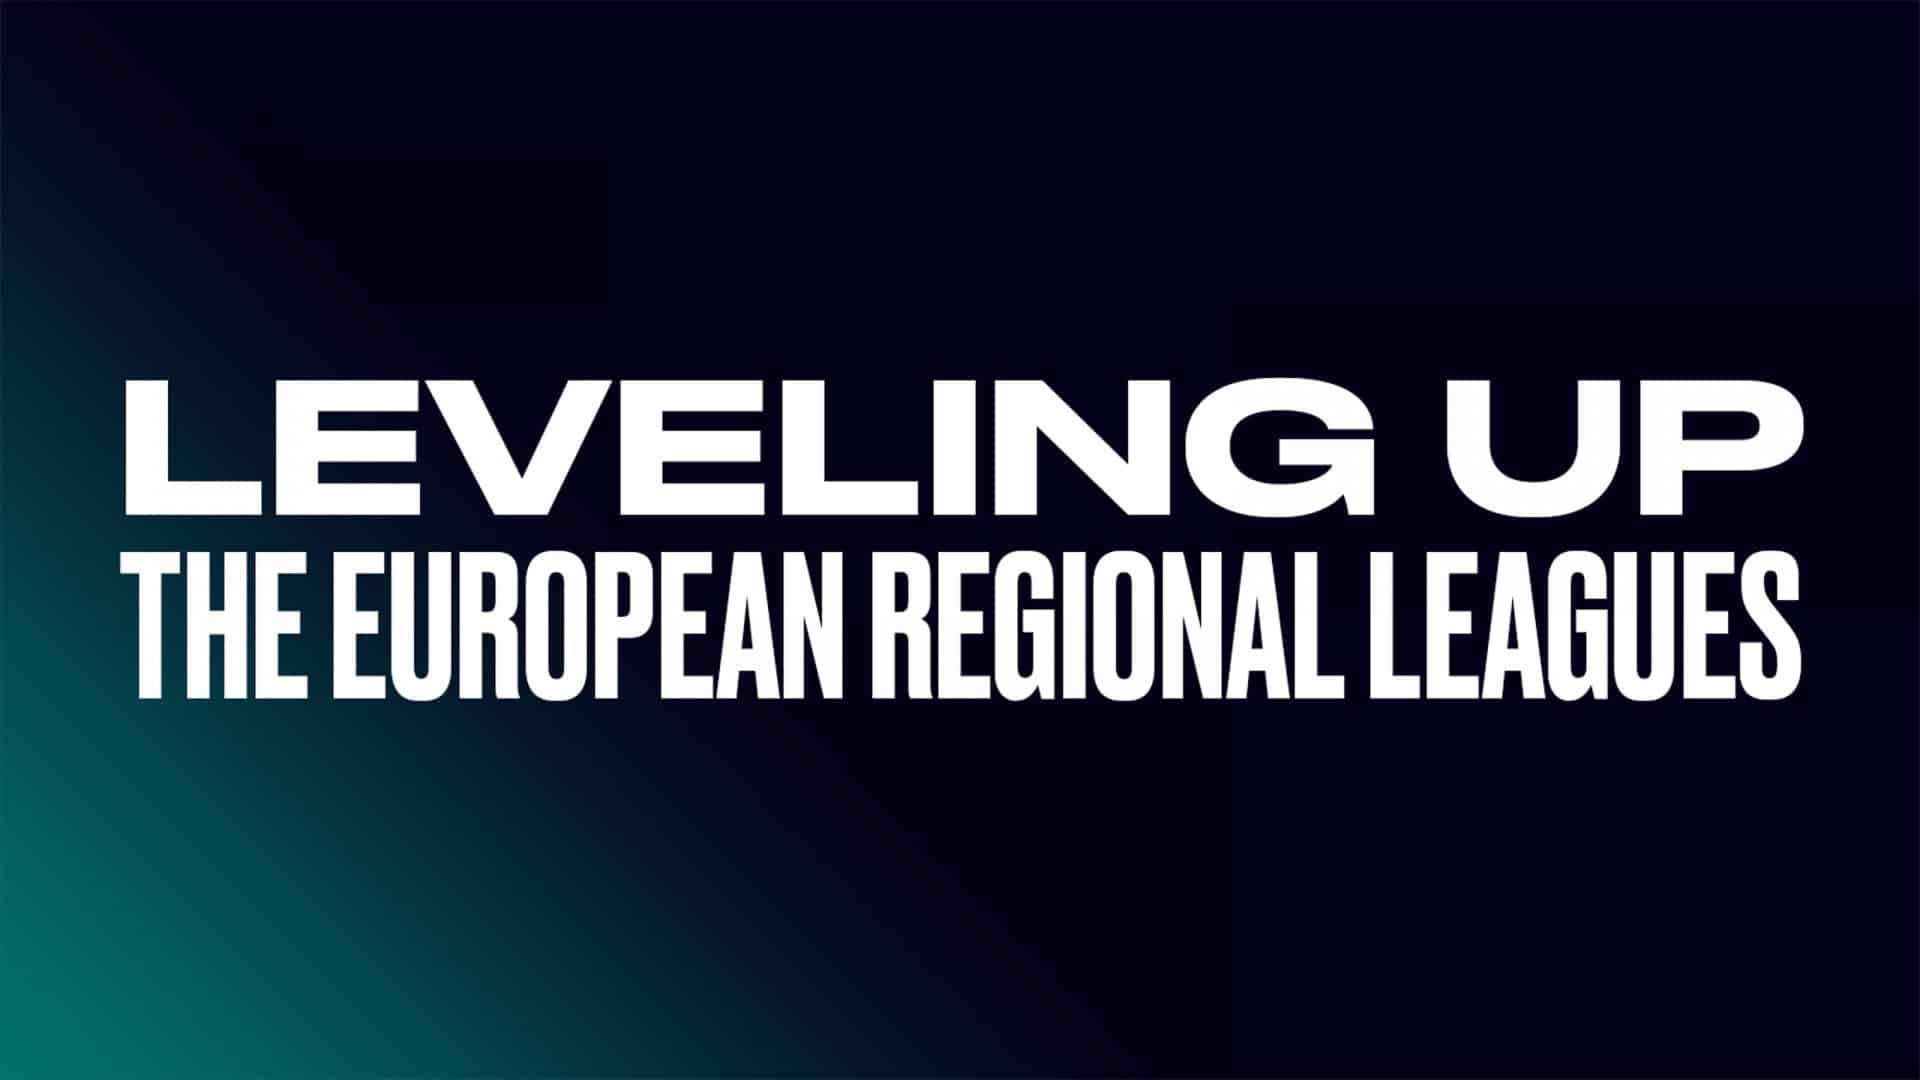 Image shows a blue background gradienting to green, with white lettering front that runs "Leveling up the european regional leagues"